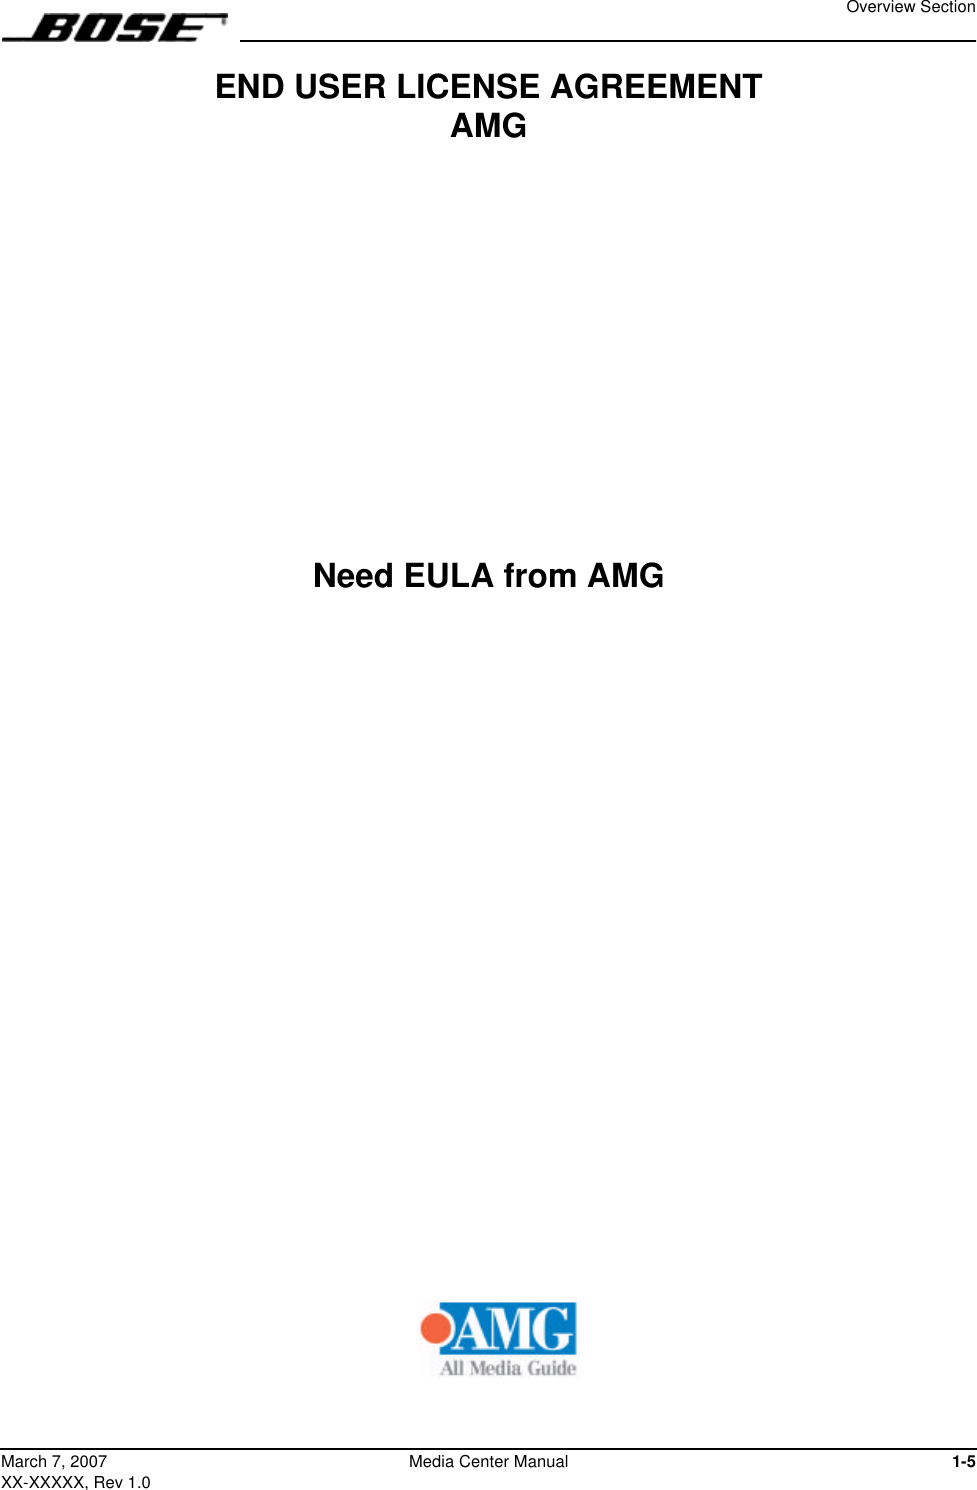 Overview Section1-5March 7, 2007XX-XXXXX, Rev 1.0Media Center ManualEND USER LICENSE AGREEMENT AMGNeed EULA from AMG 